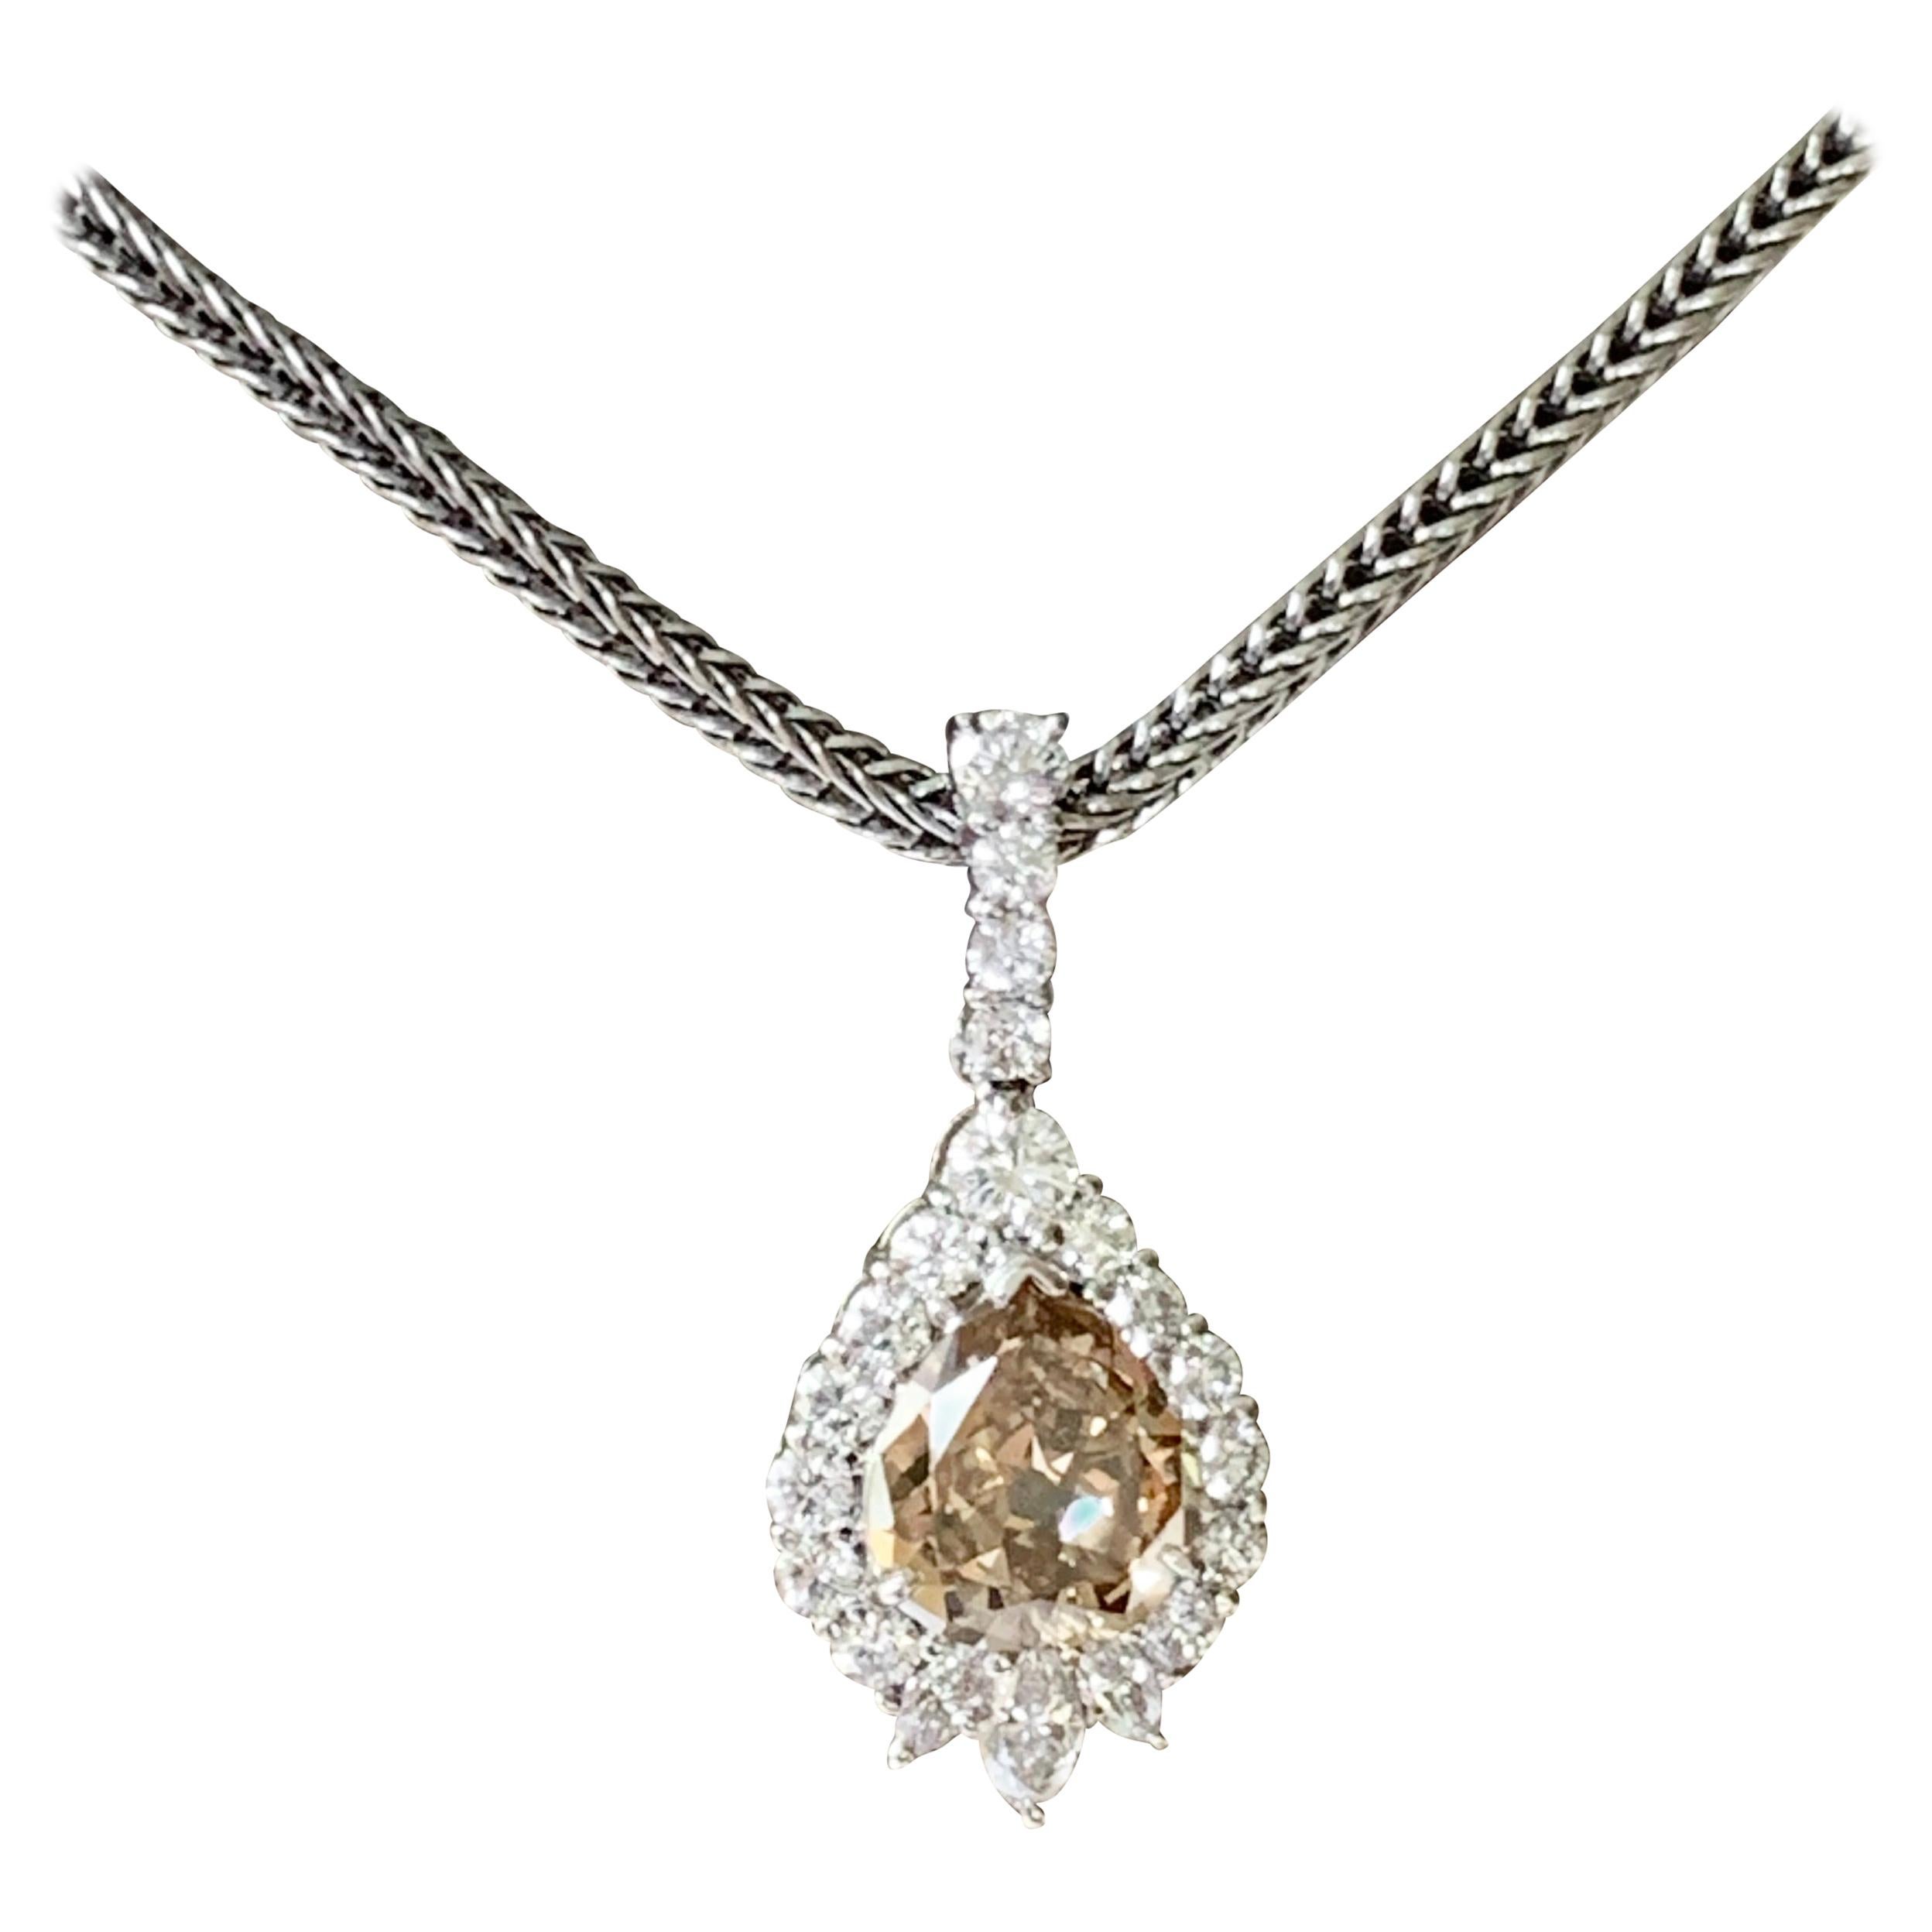 Platinum Pendant with Chain Set with a Pear Shape Champagne Diamond